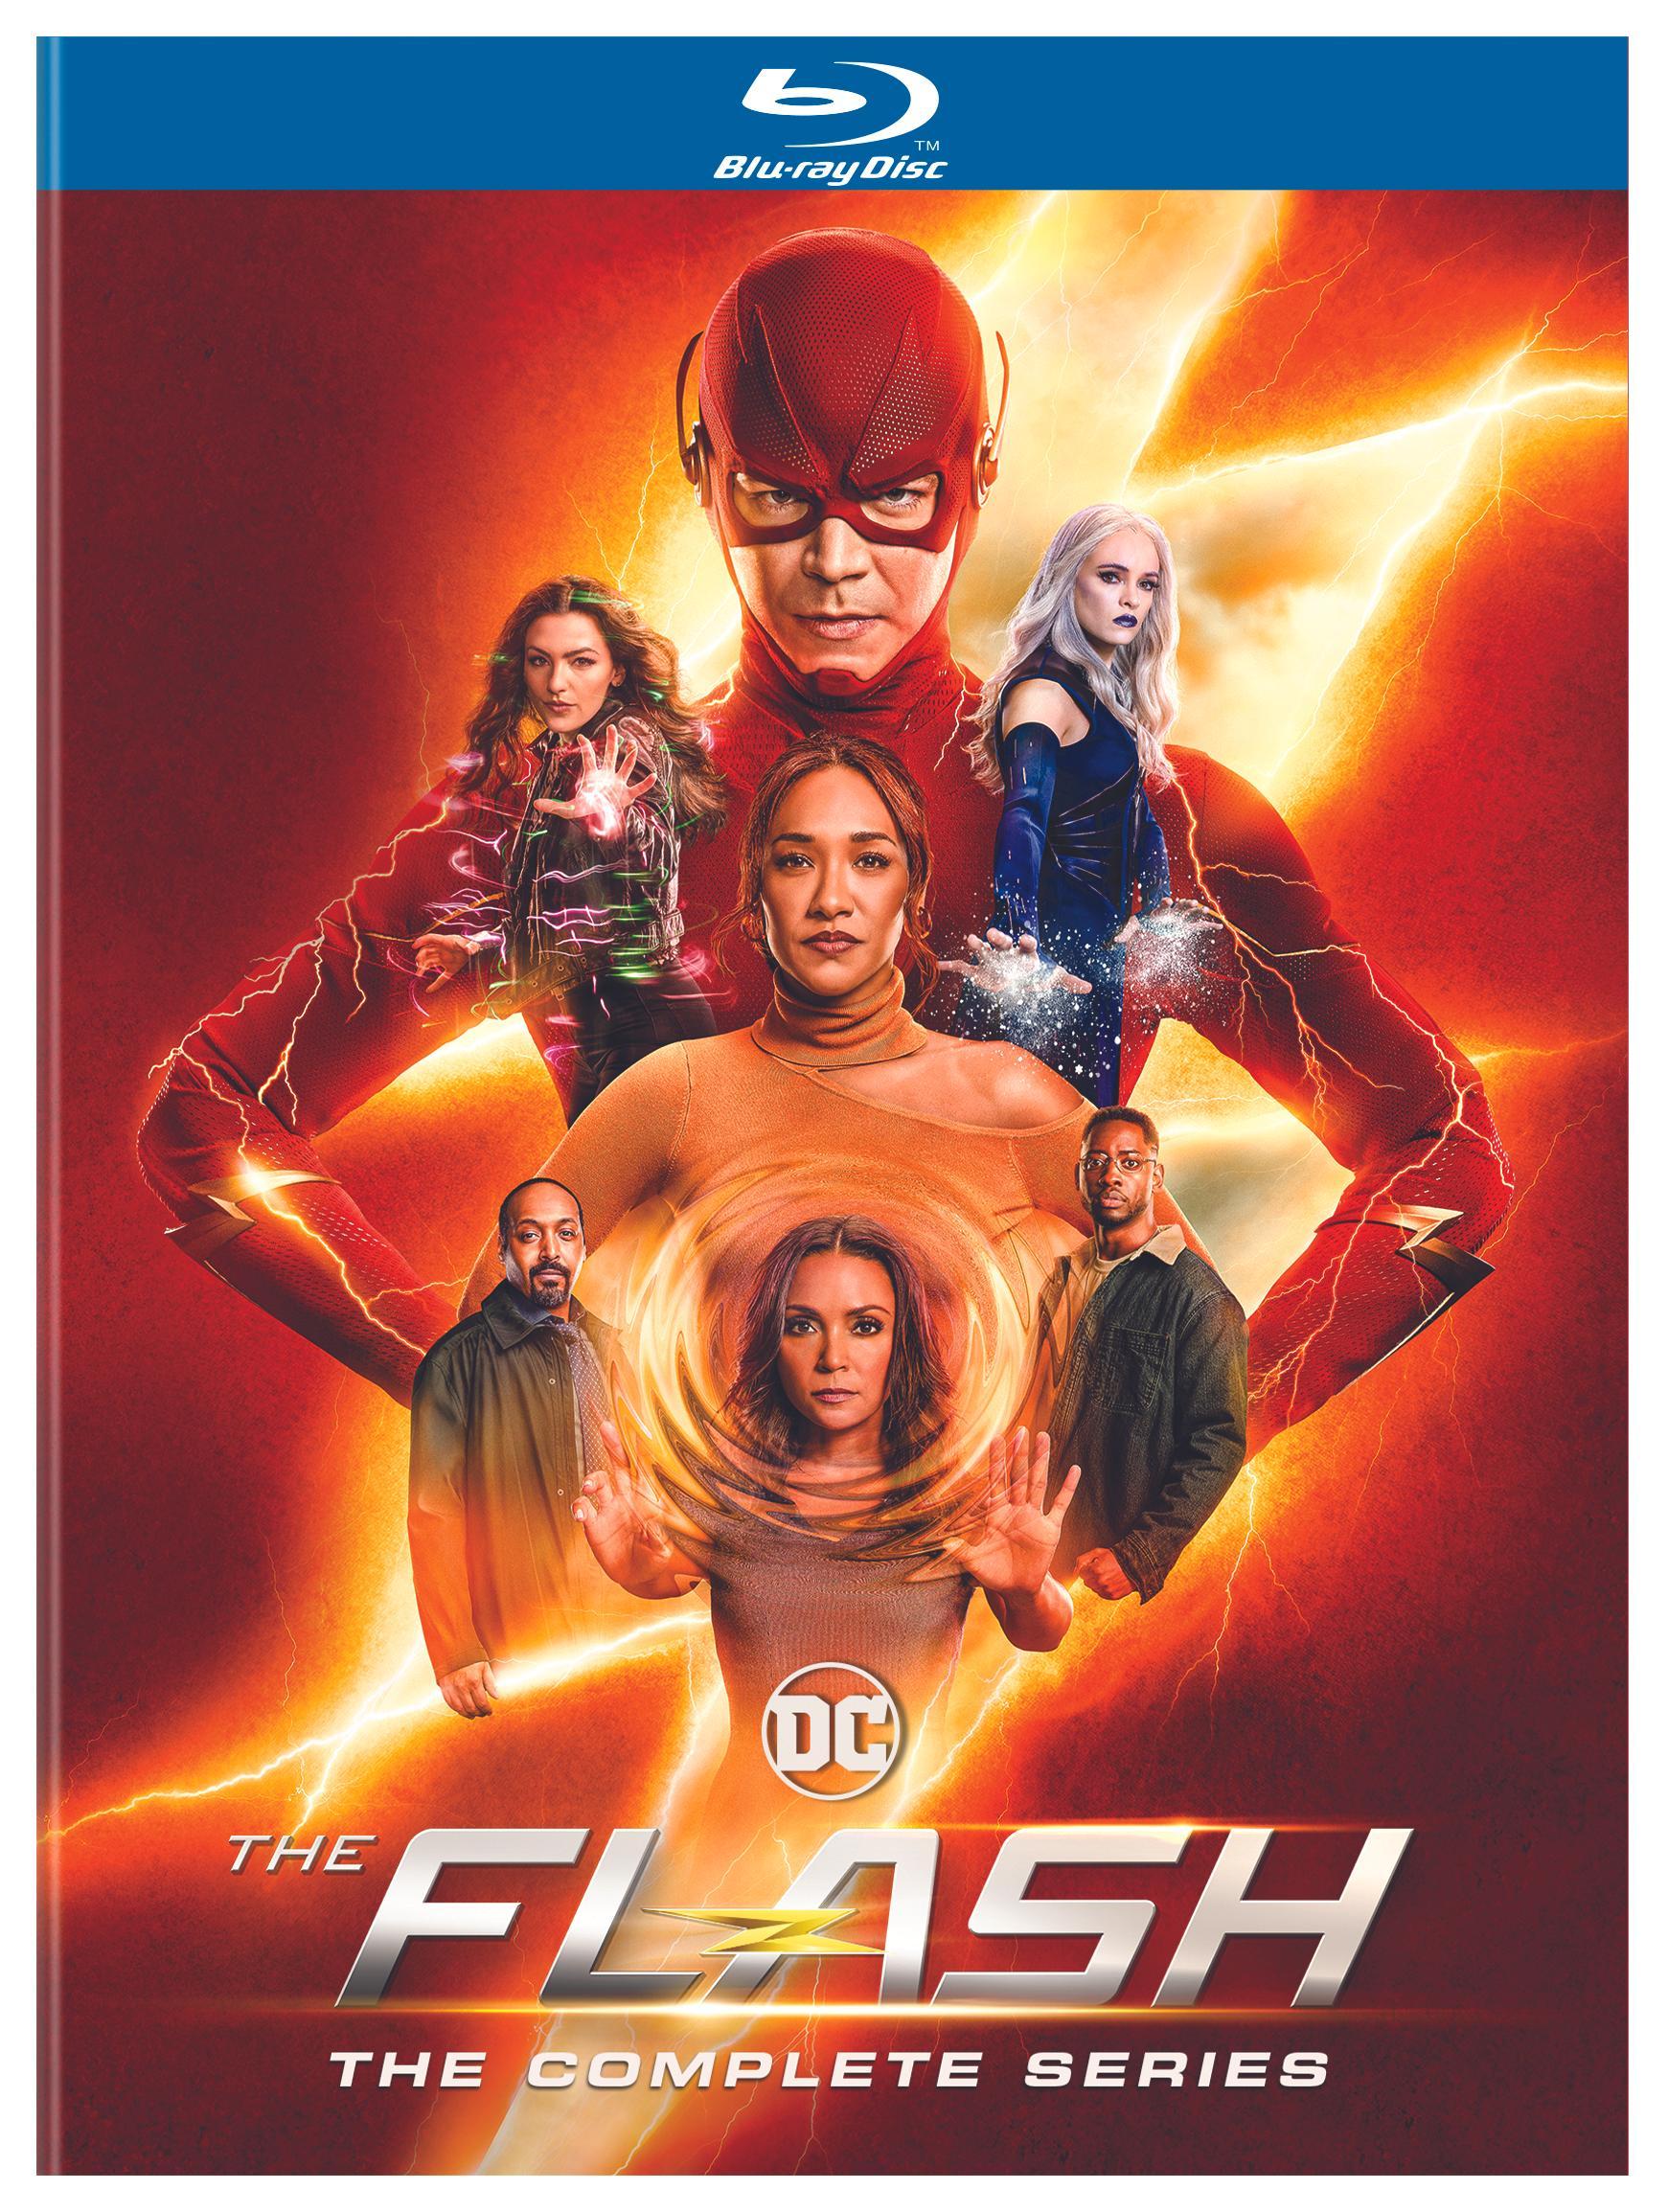 The Flash: The Complete Series (Box Set) - Blu-ray [ 2023 ]  - Drama Television On Blu-ray - TV Shows On GRUV